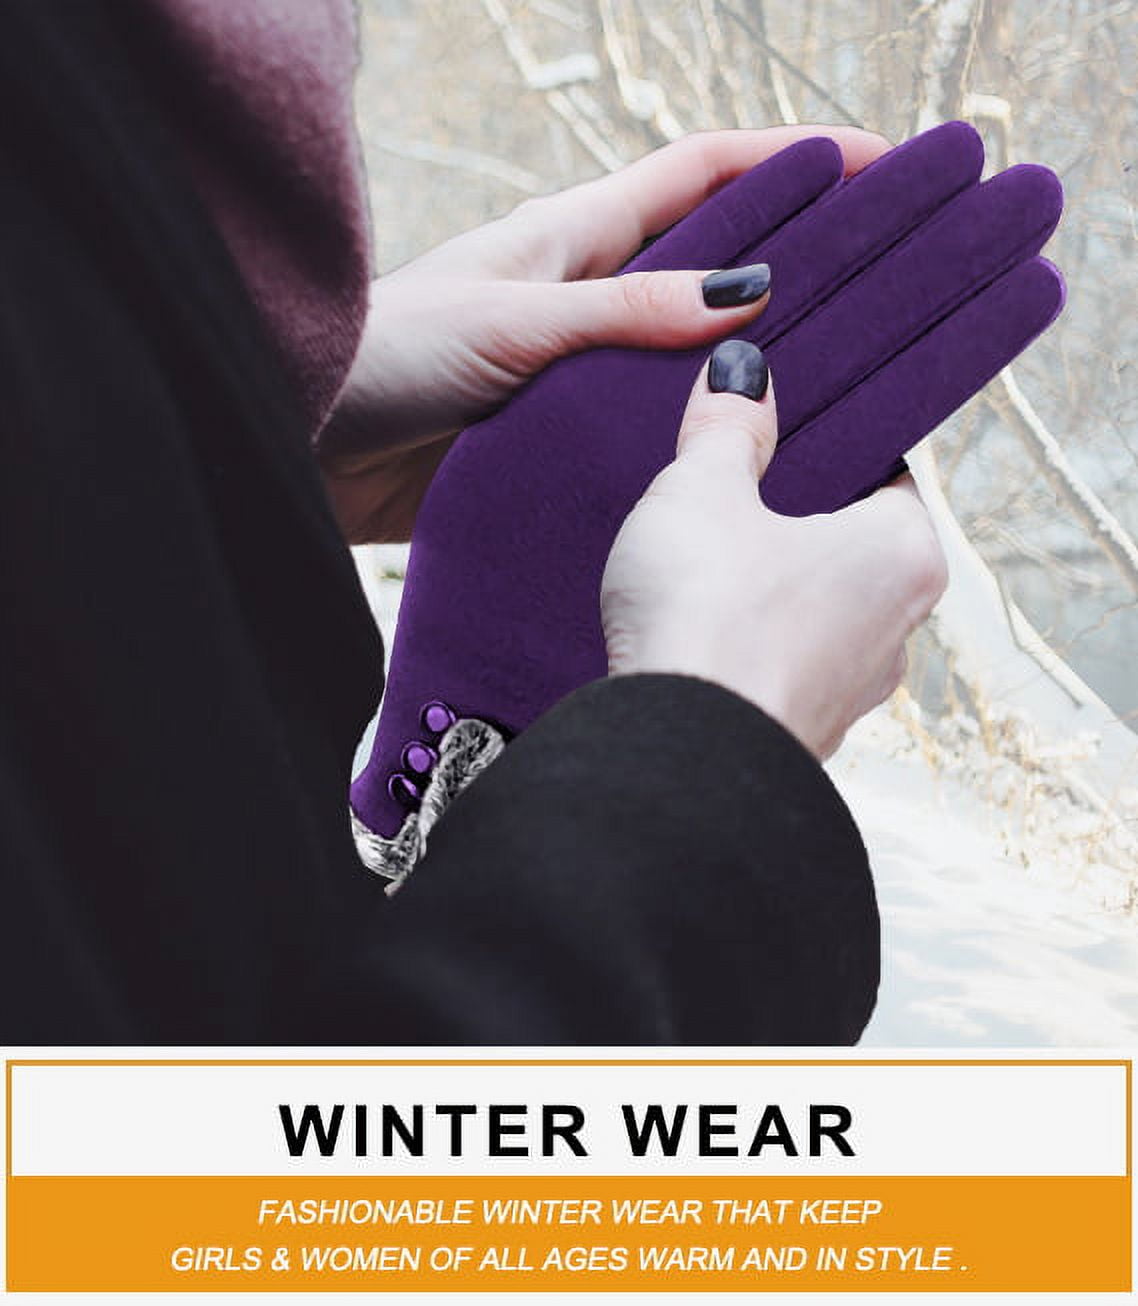 Whiteleopard Womens Winter Warm Gloves With Sensitive Touch, 57% OFF